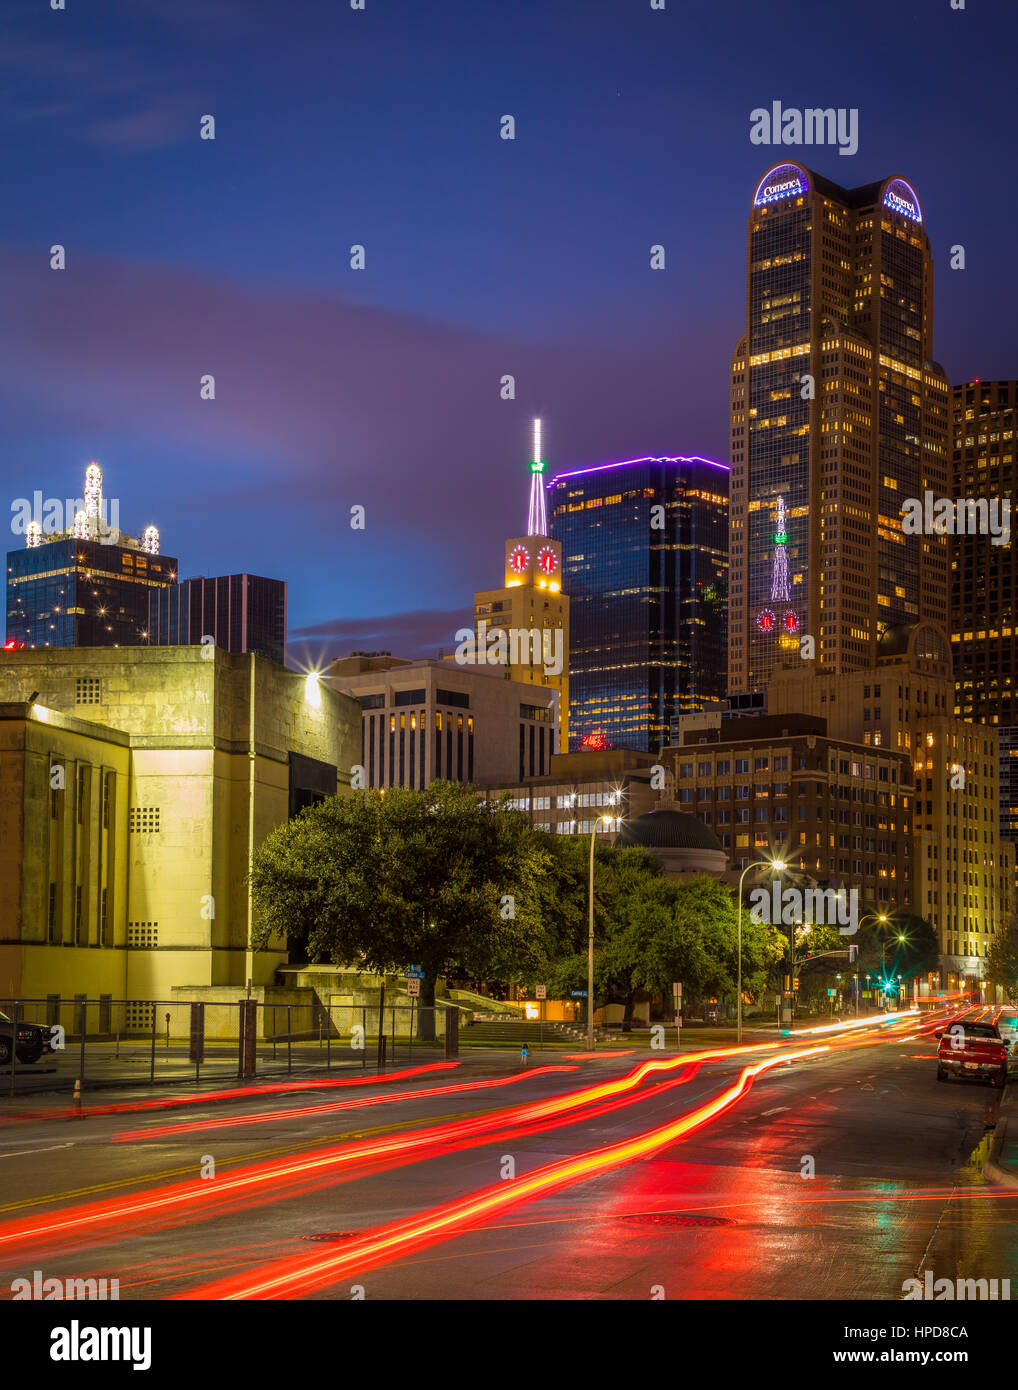 Dallas is the ninth most populous city in the United States of America and the third most populous city in the state of Texas. The Dallas-Fort Worth m Stock Photo